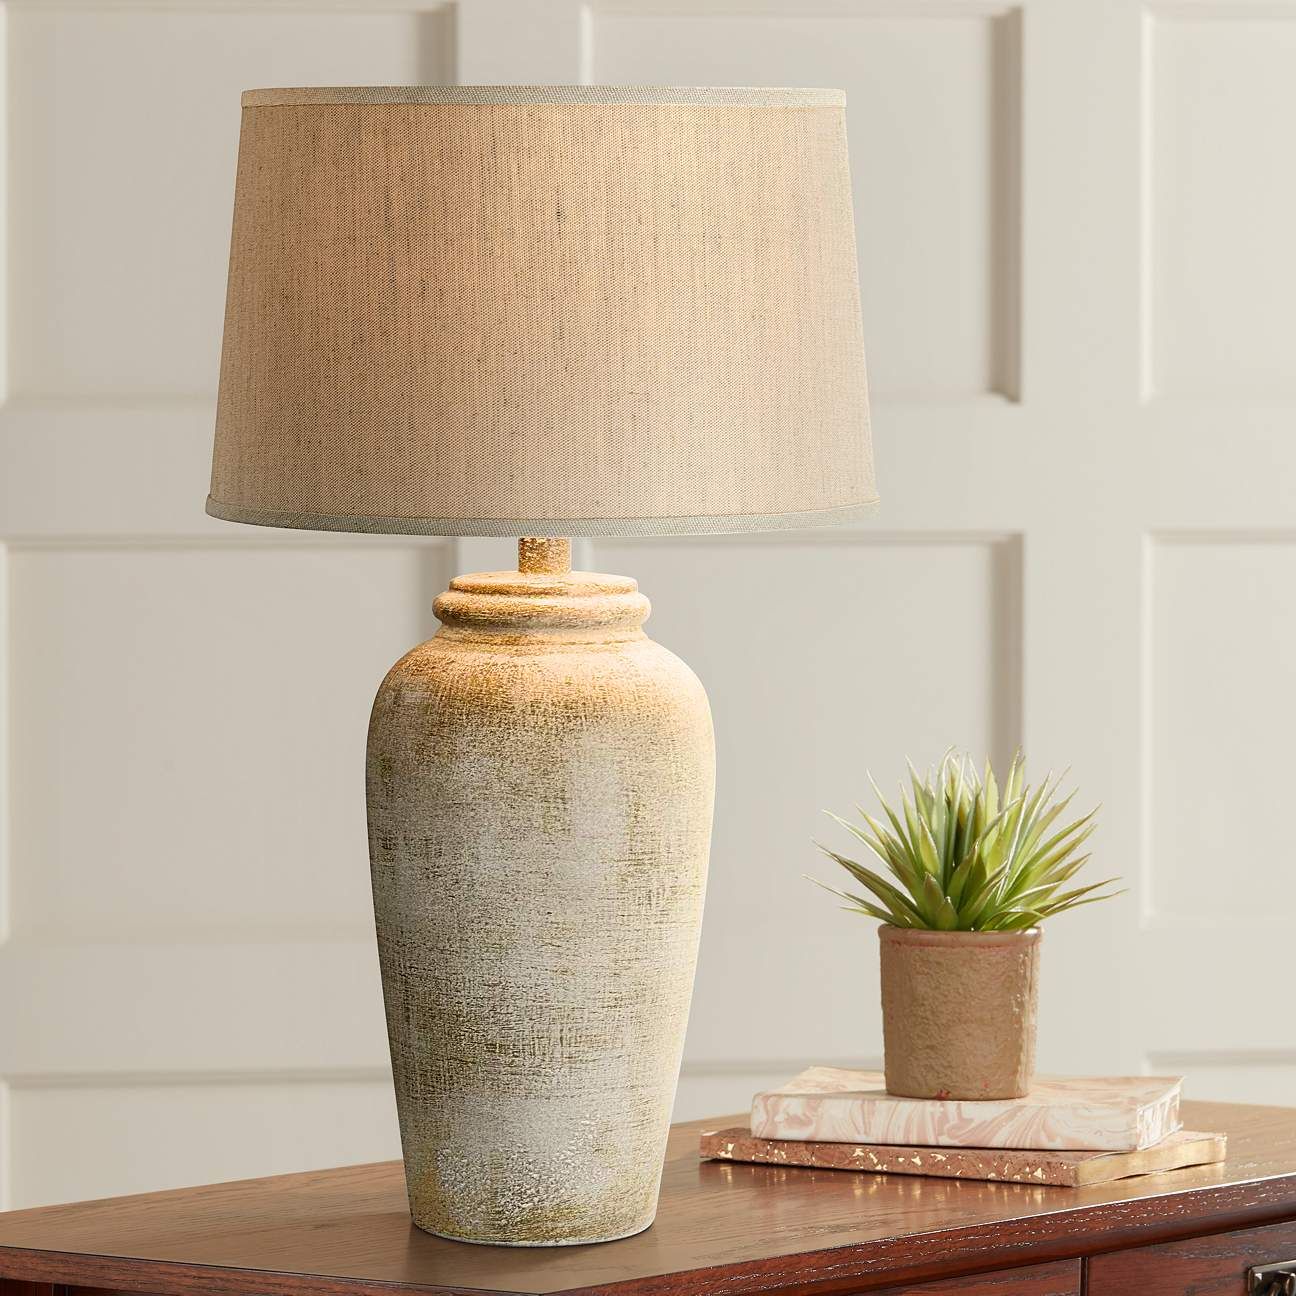 Lechee Sand Stone Finish Handcrafted Rustic Table Lamp | Lamps Plus